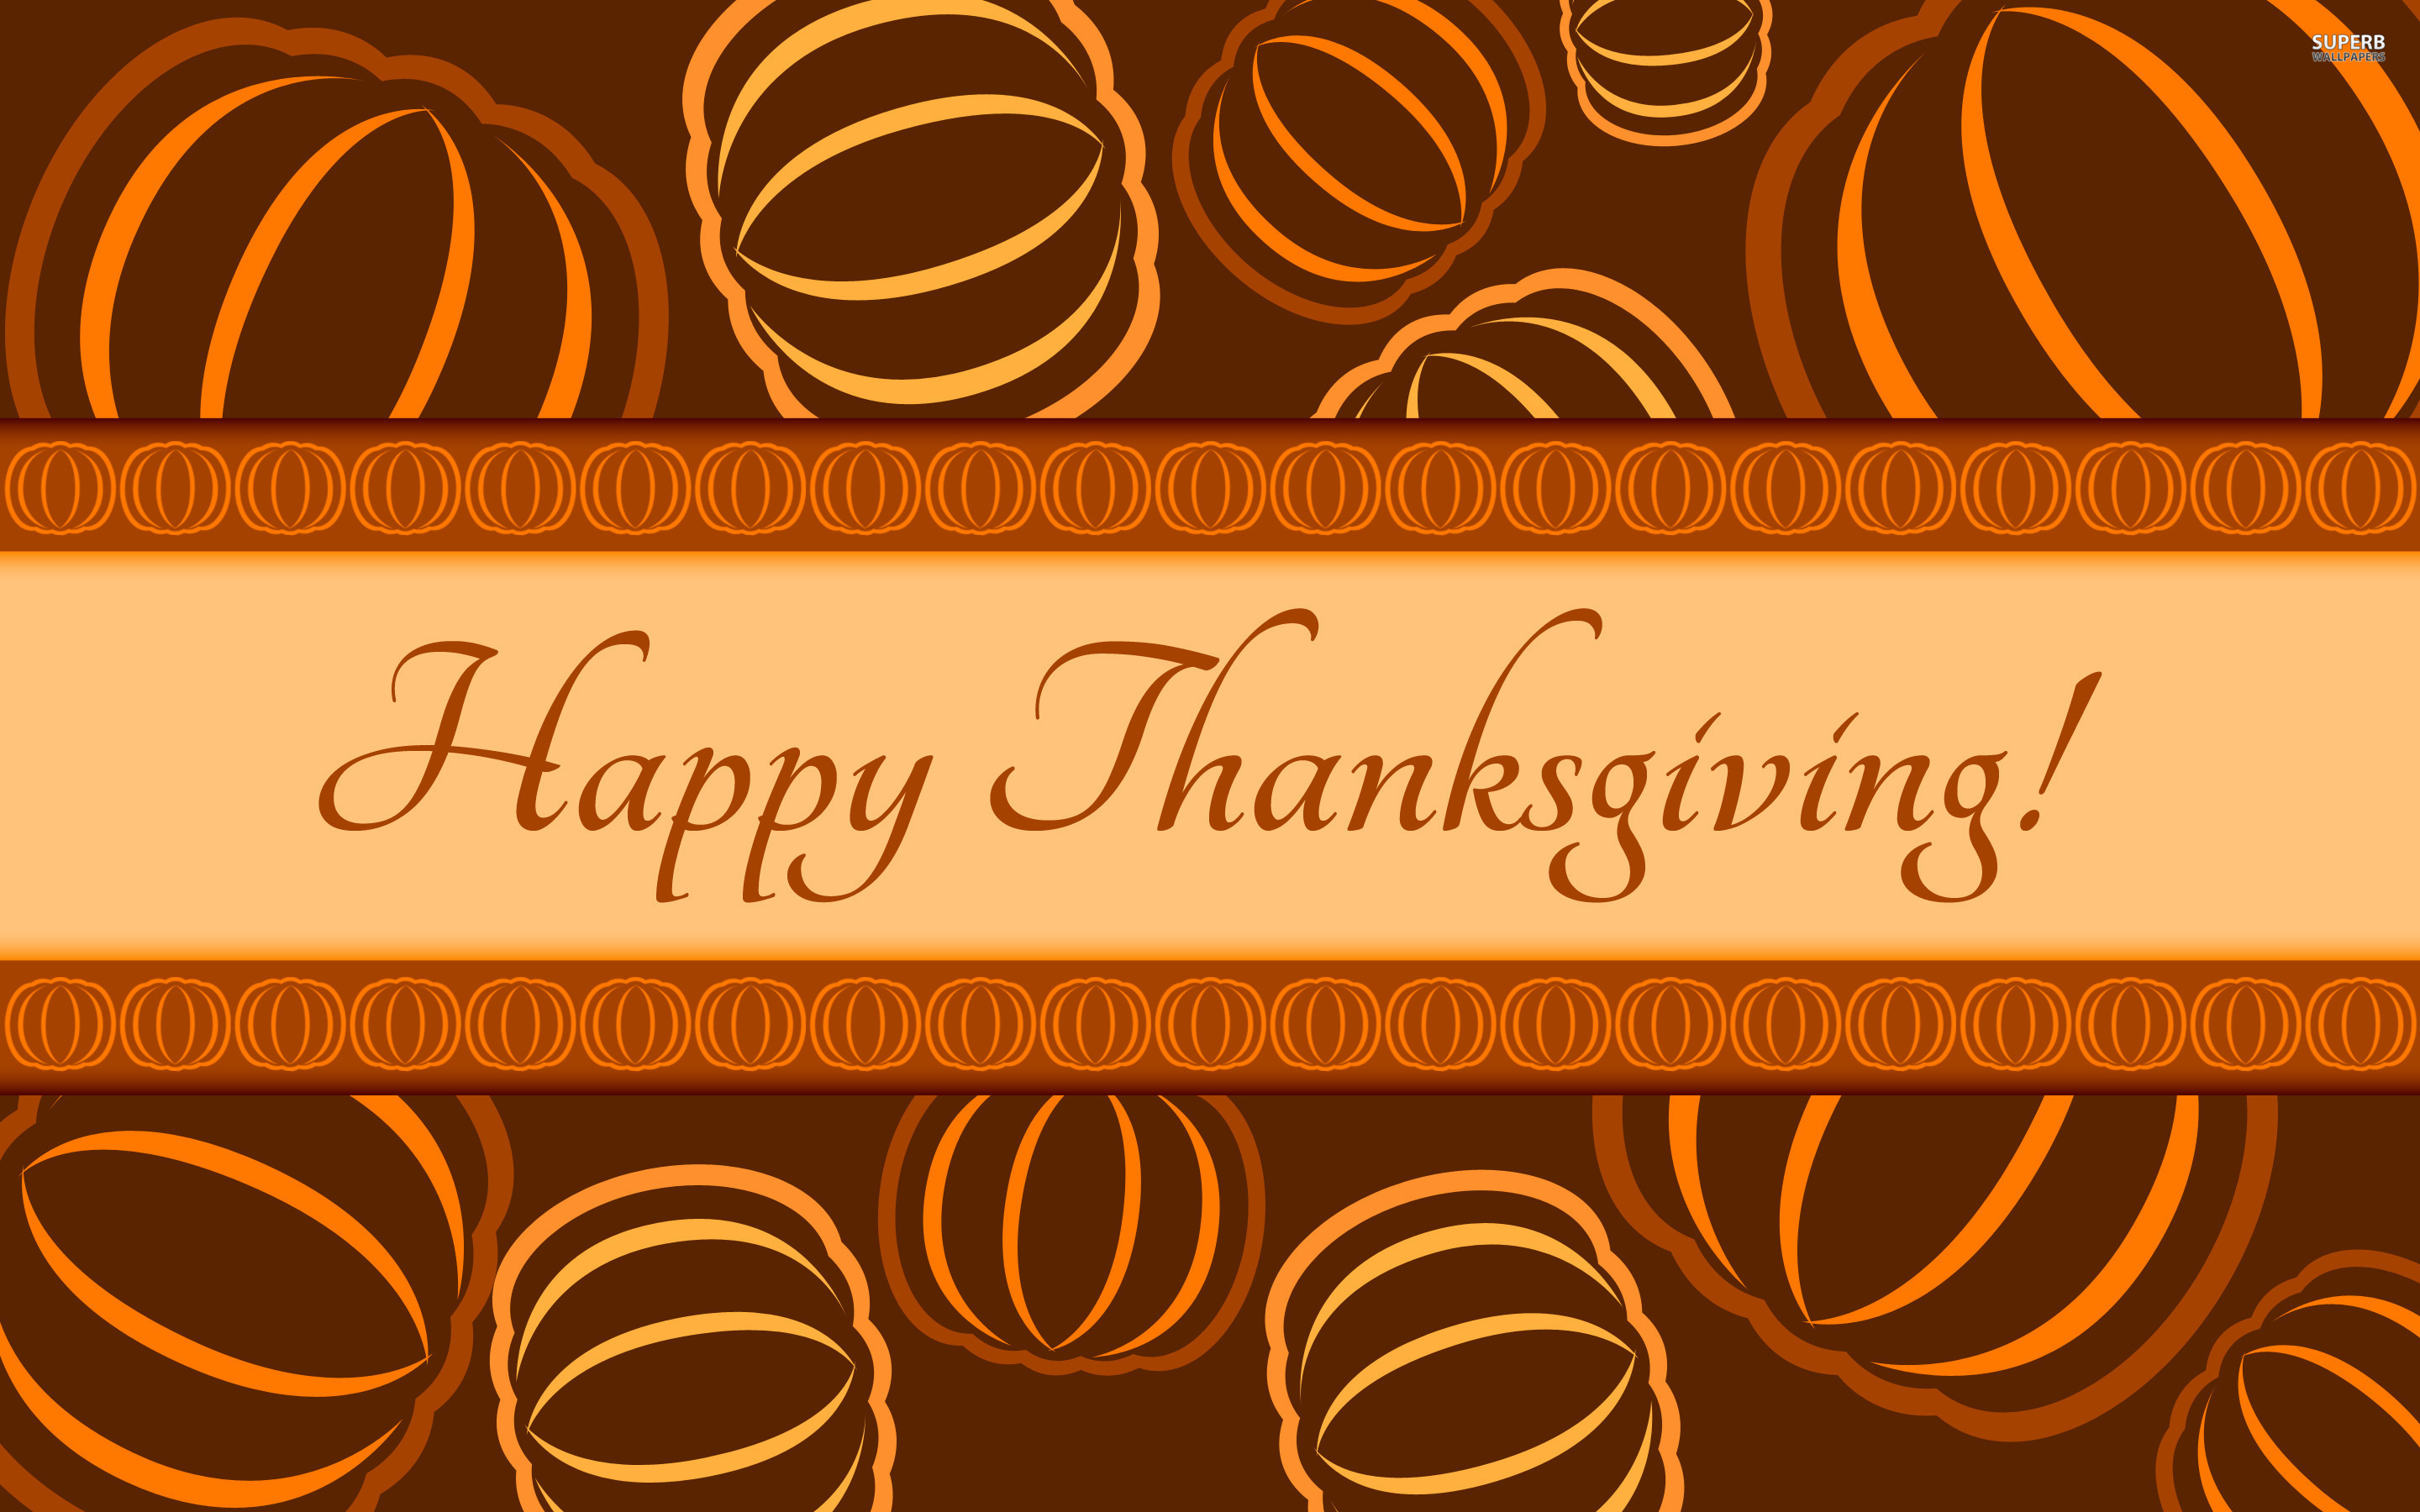 Thanksgiving Day Wallpapers Images Backgrounds Download #7421 | HD ...